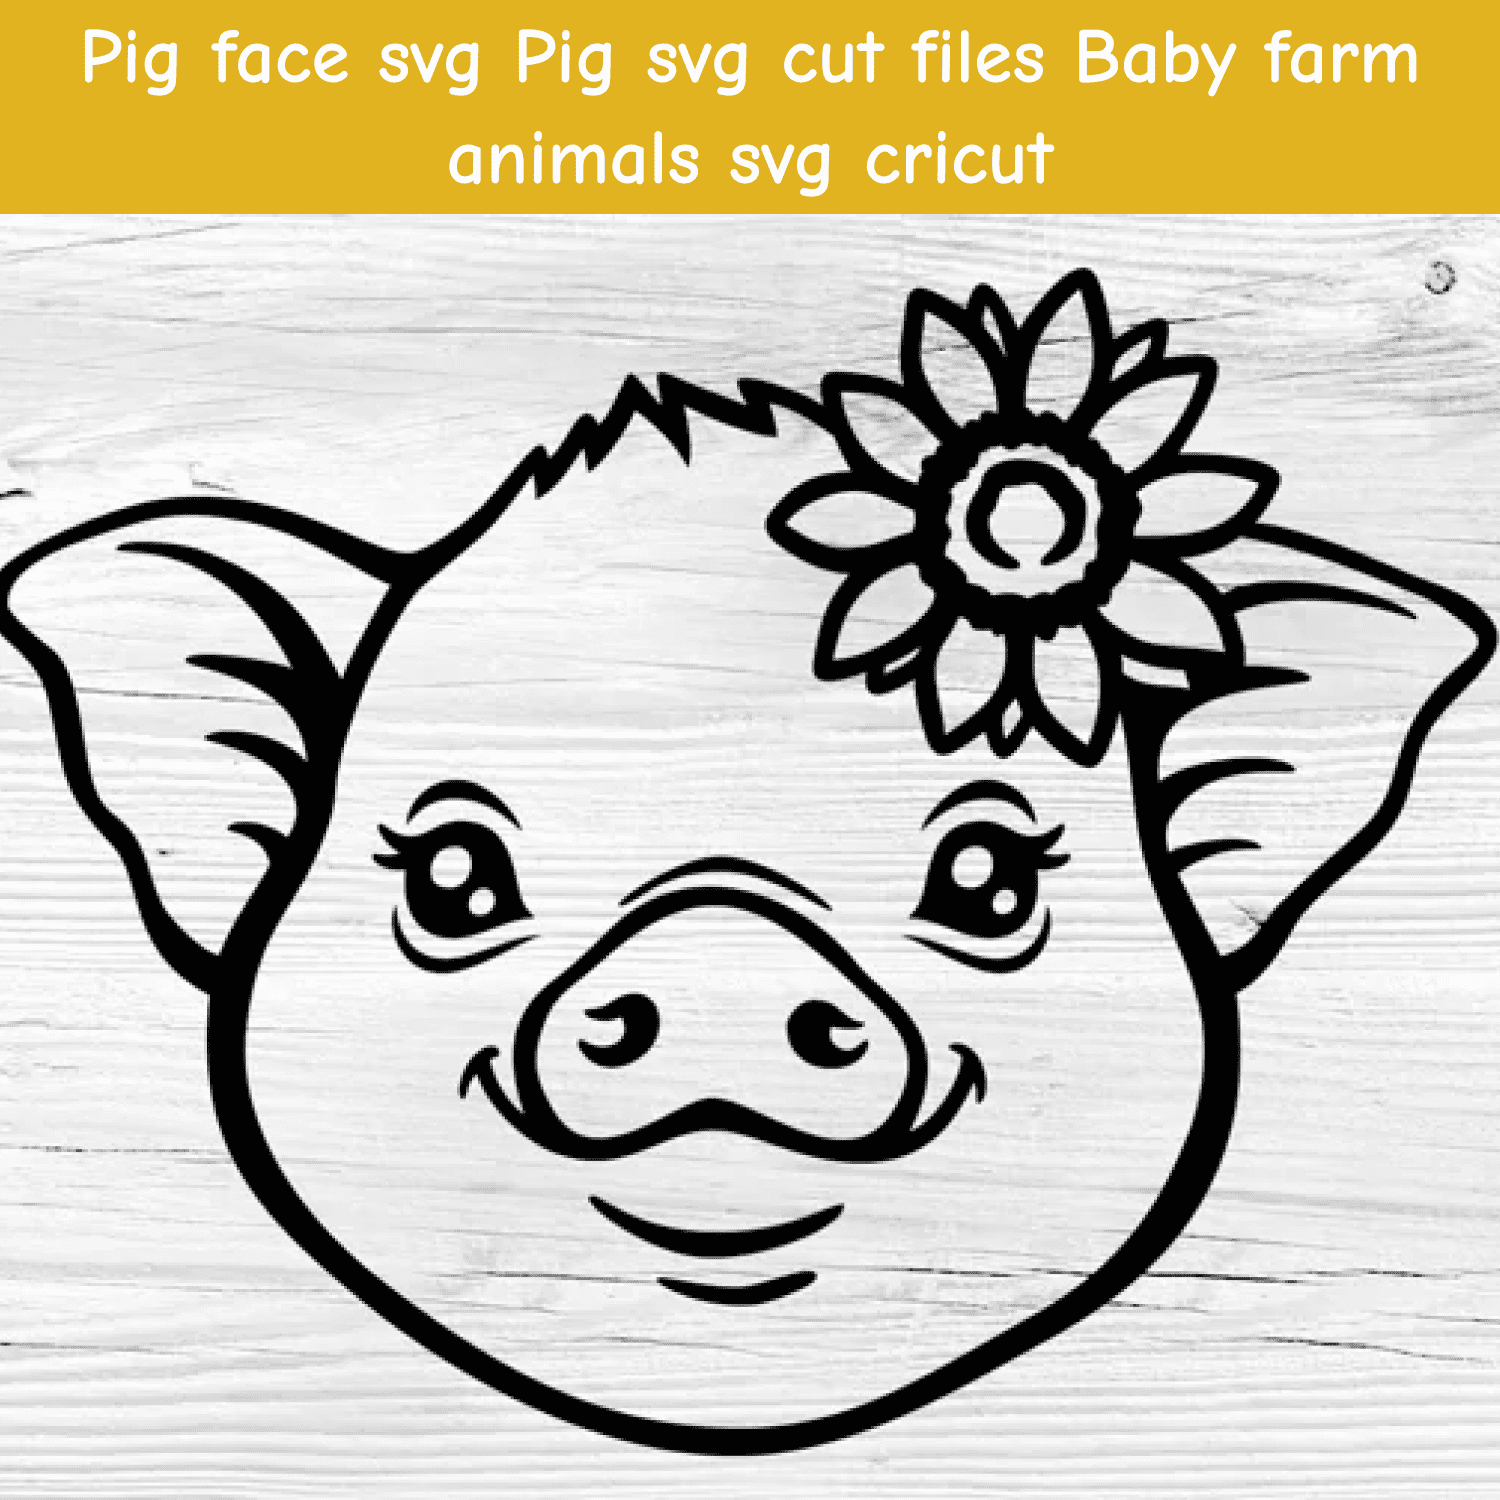 Pig with a flower on its head.